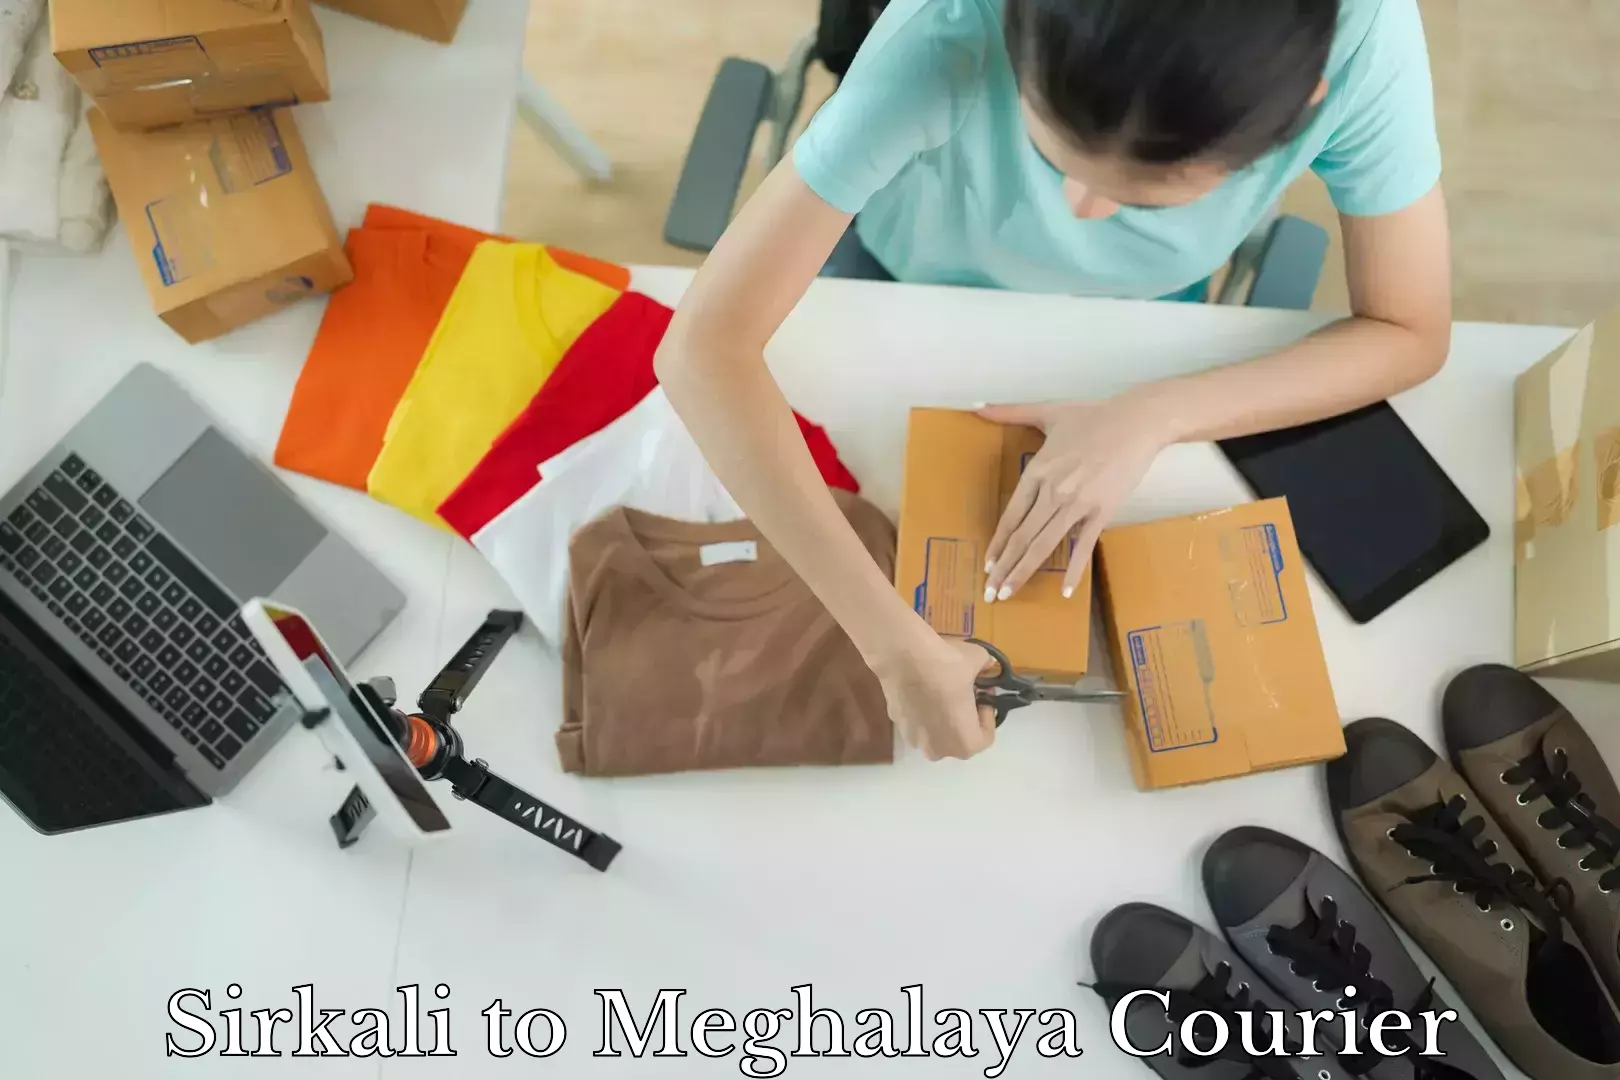 Courier service comparison Sirkali to Meghalaya